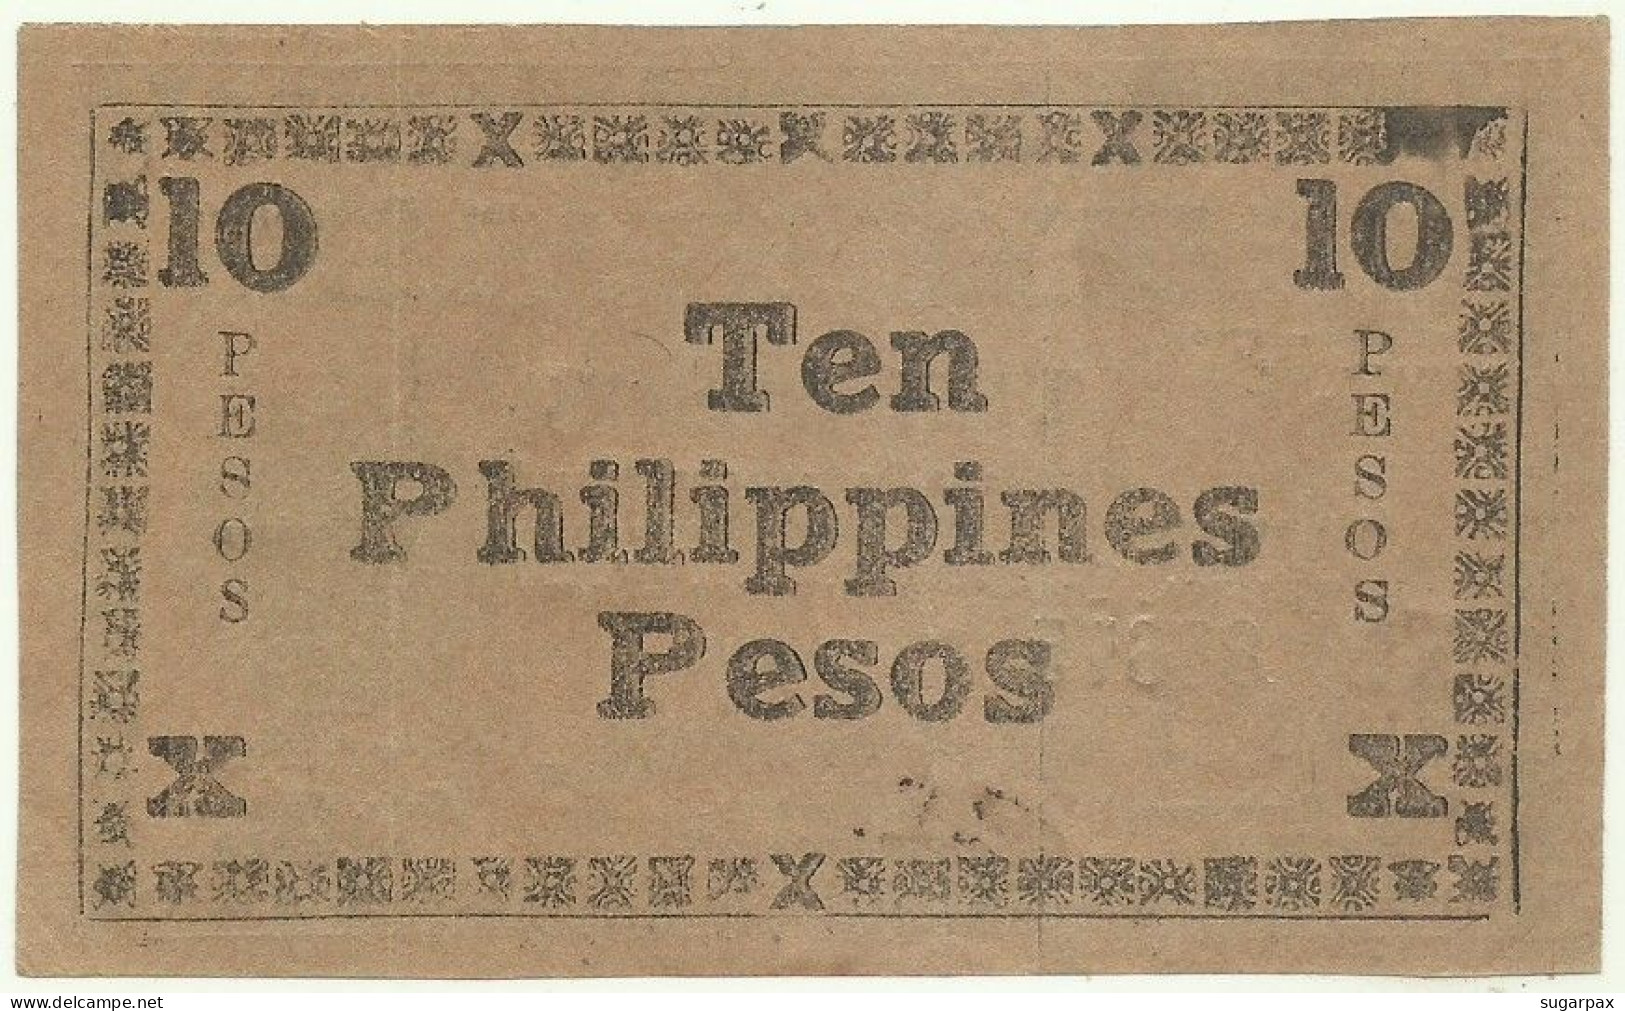 PHILIPPINES - 10 Pesos - 1945 - Pick S 683 - Serie J2 - Negros Emergency Currency Board - Filipinas